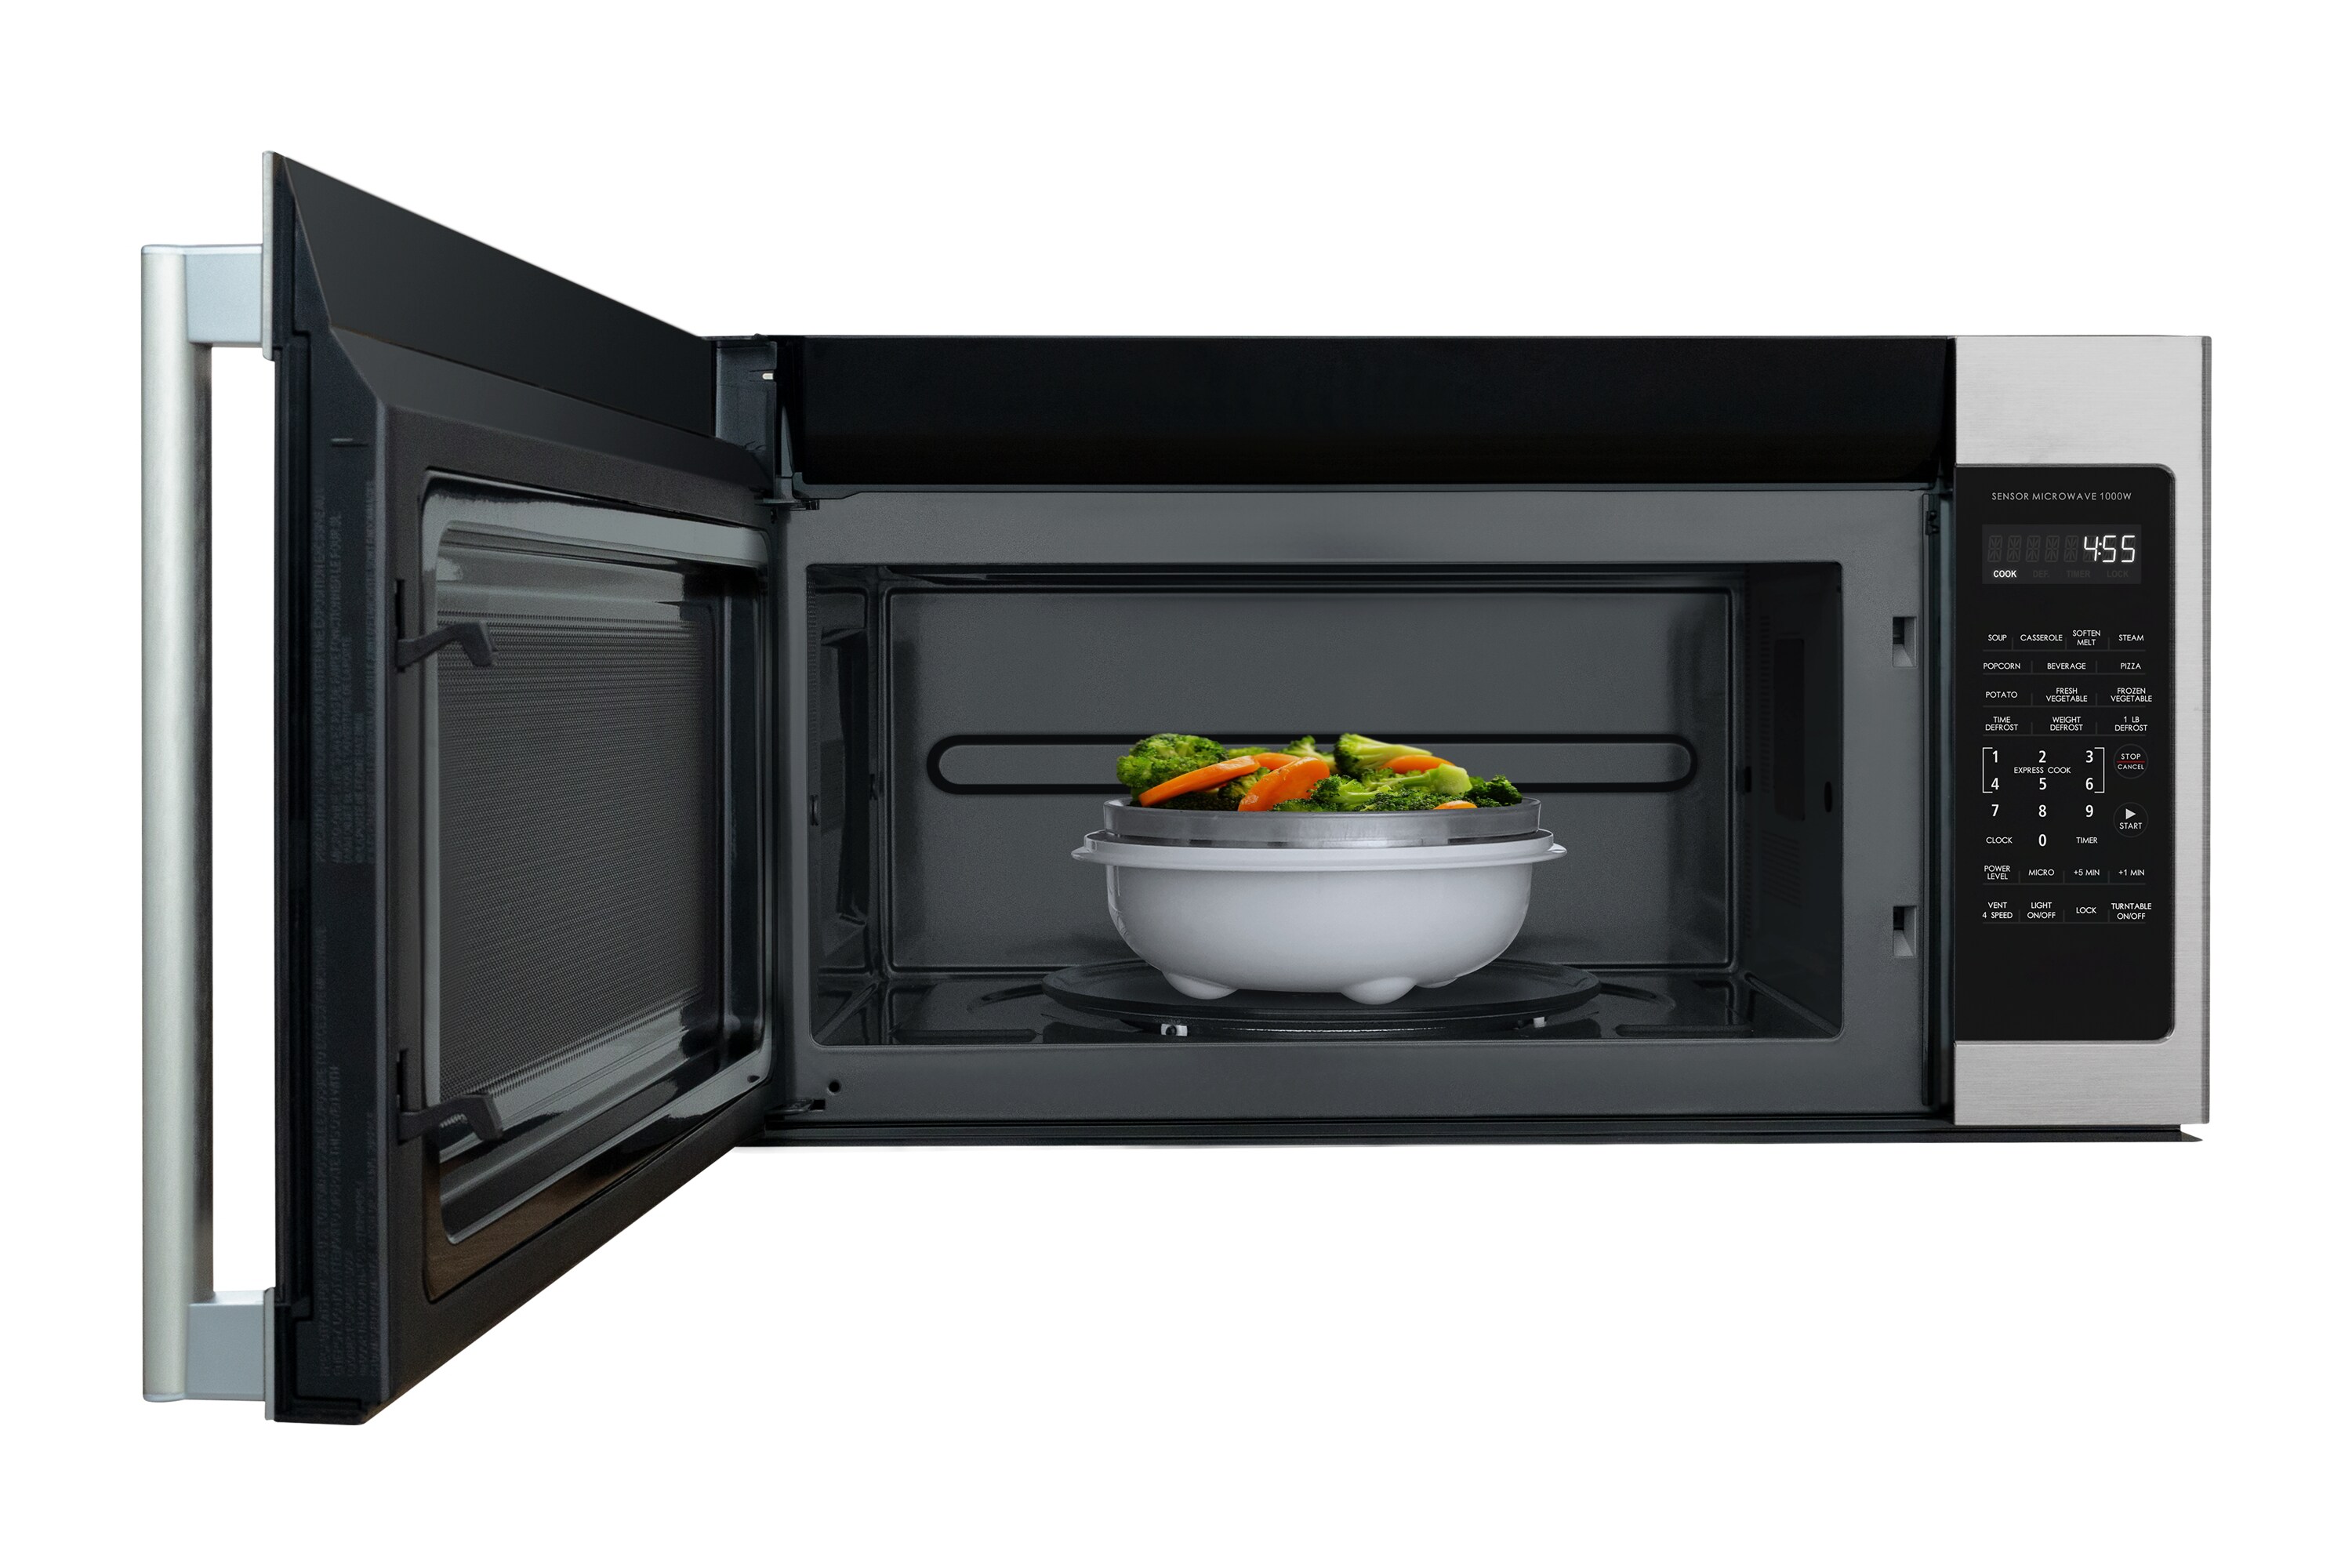 Galanz 22-inch, 1.6 cu.ft. Countertop Microwave Oven with TotalFry 360